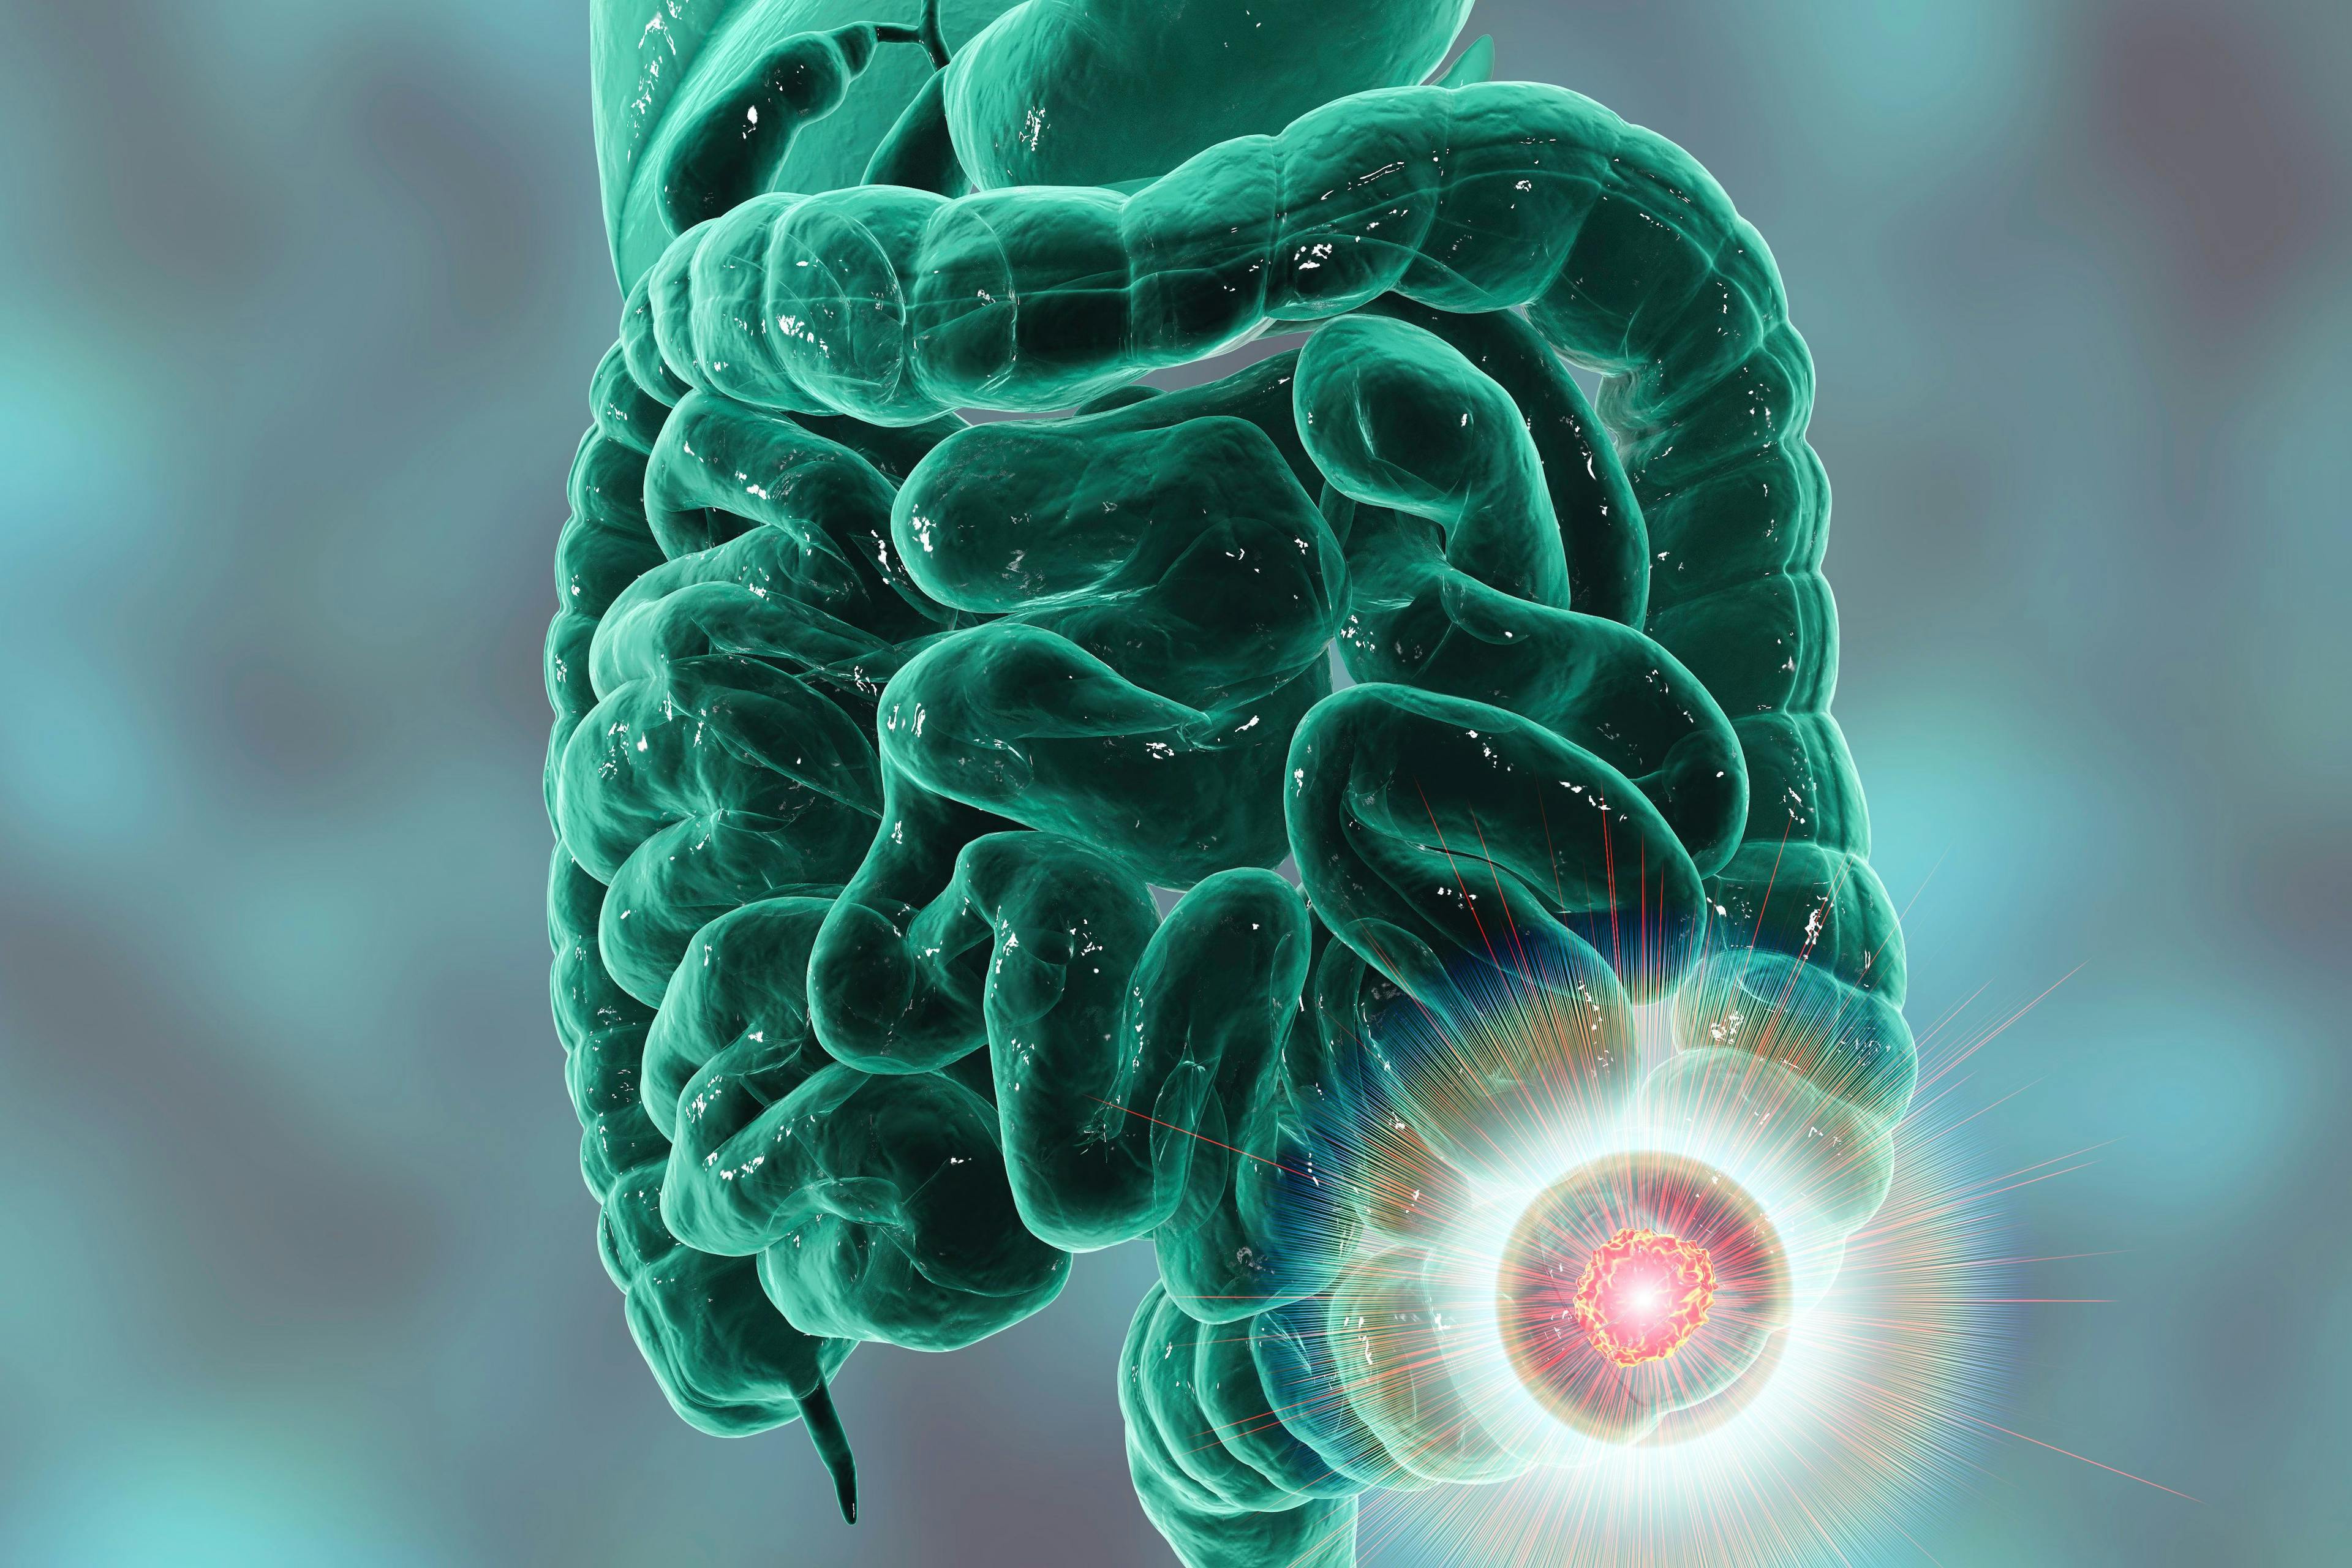 Colorectal cancer awareness medical concept. Concept of cancer treatment and prevention, 3D illustration - Image credit: Dr_Microbe | stock.adobe.com